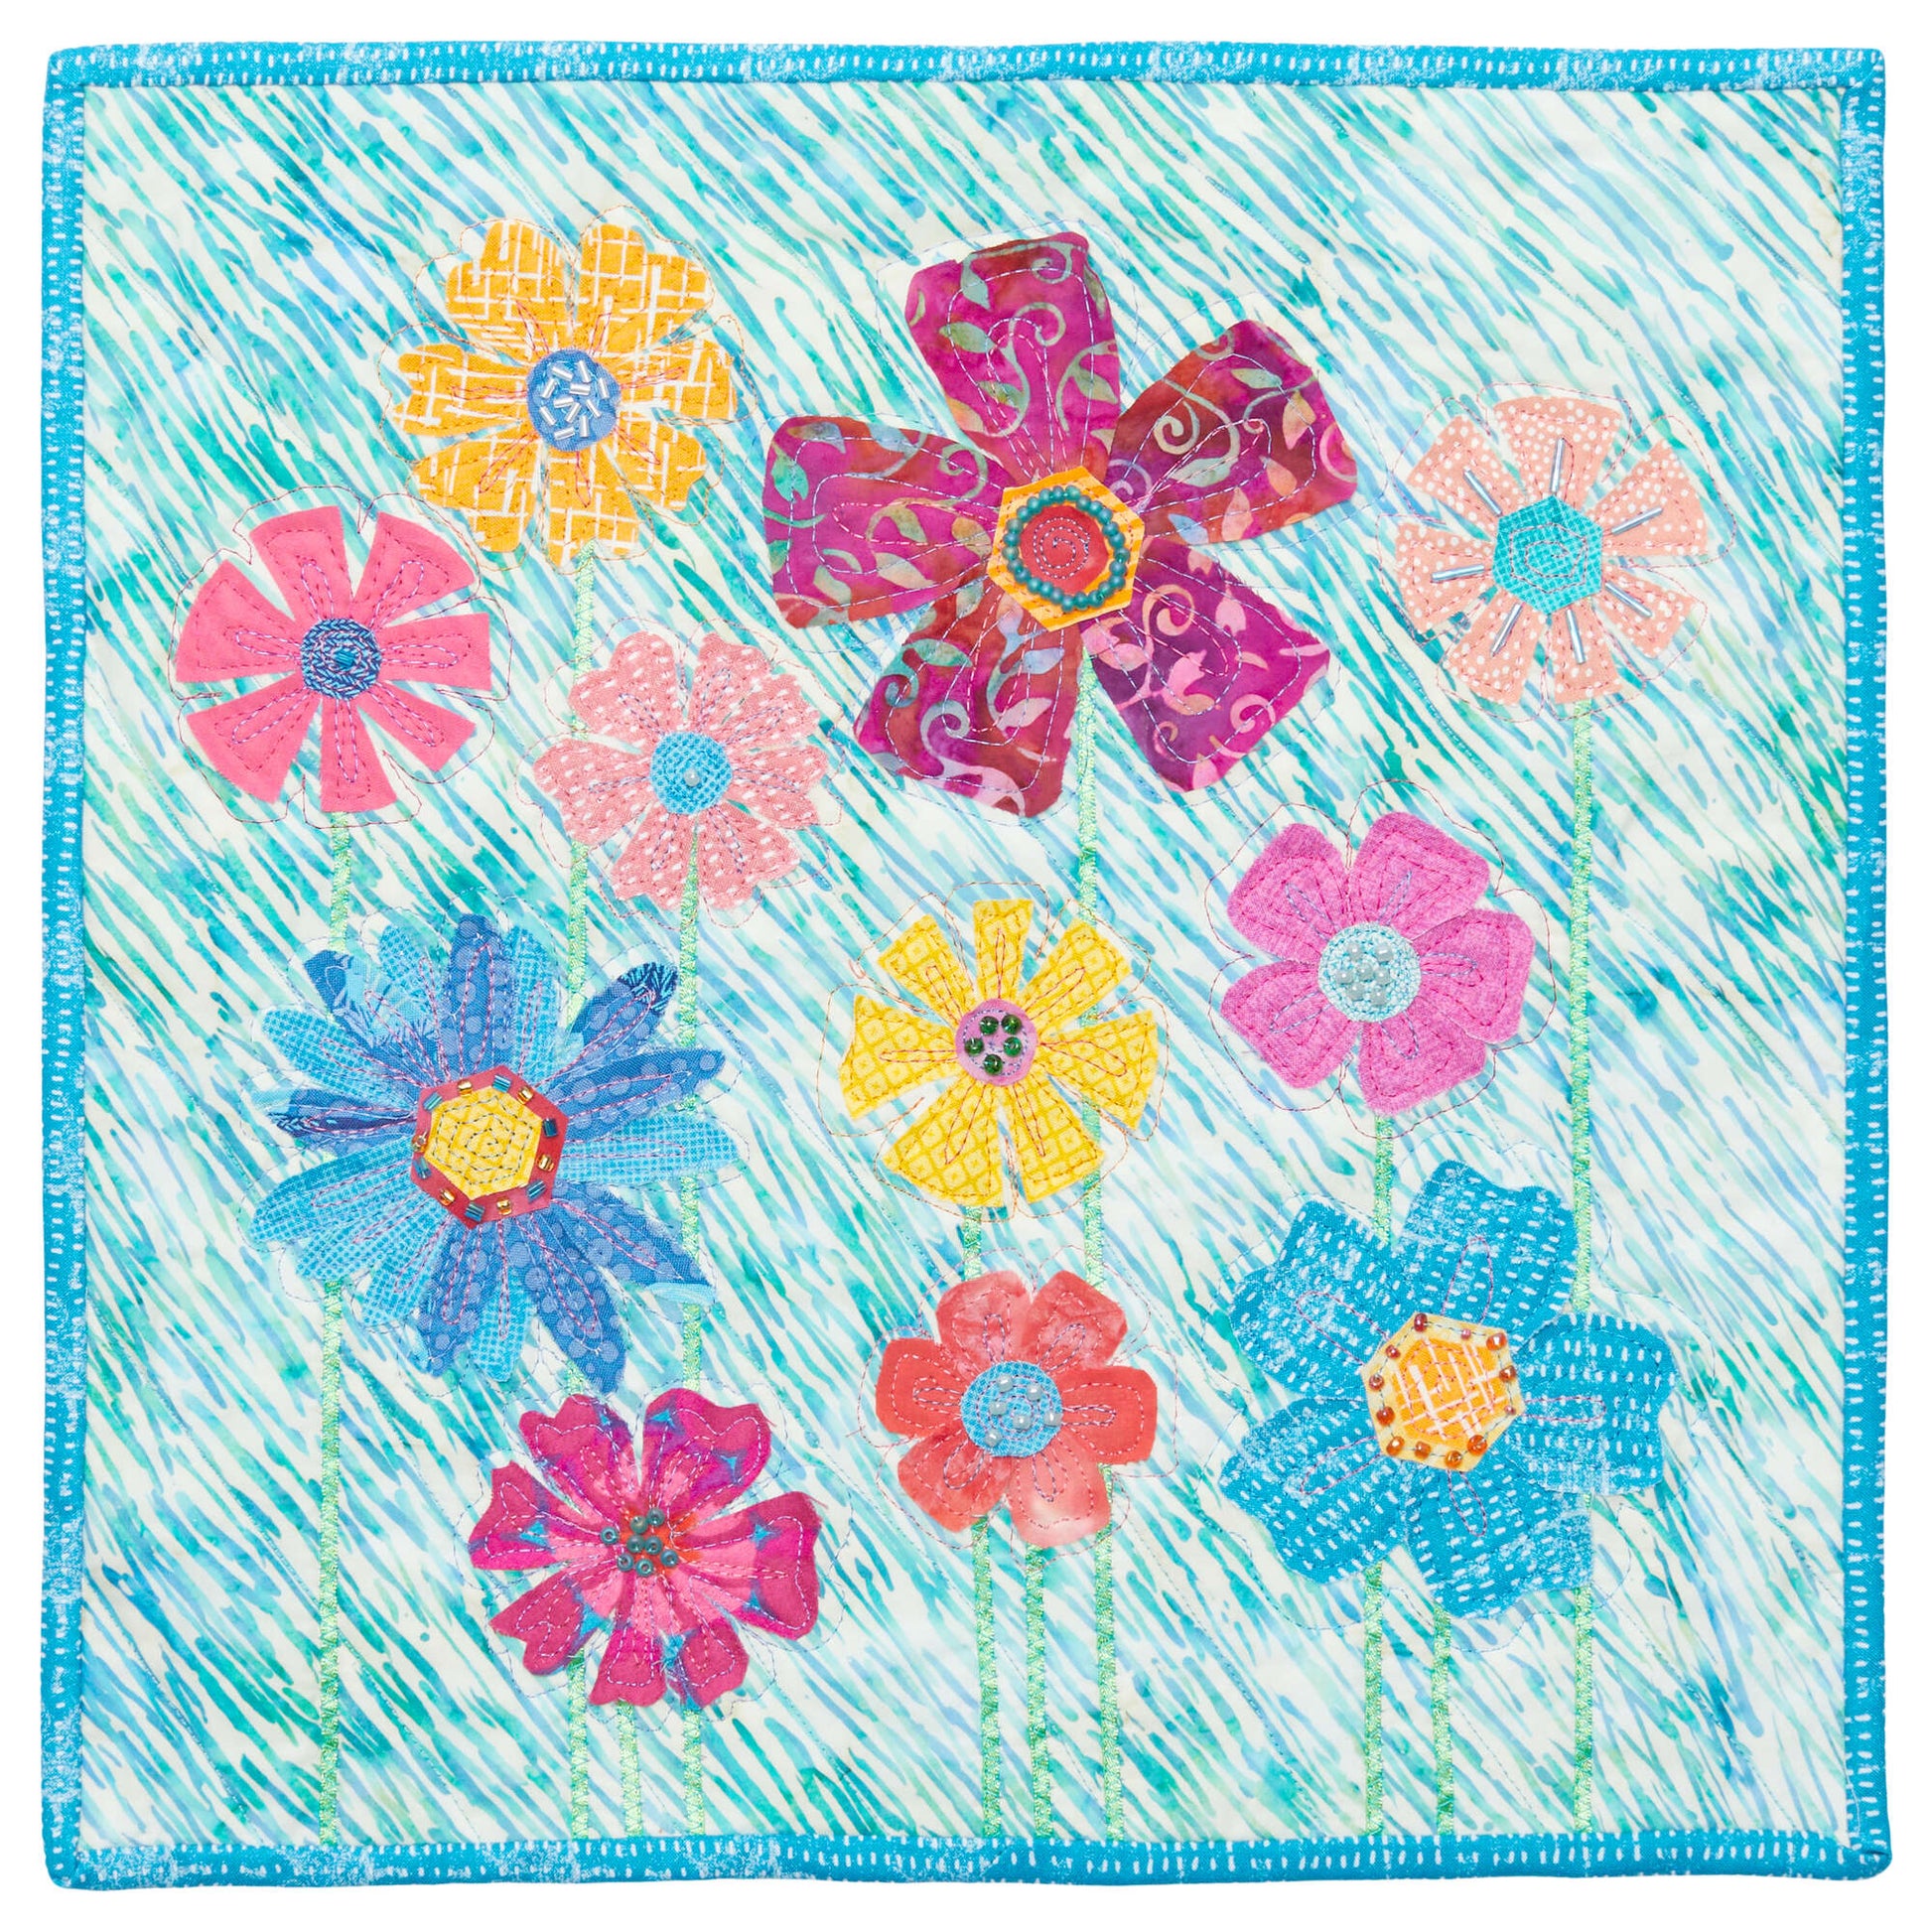 State Flower Applique Quilt and an exciting opportunity to help